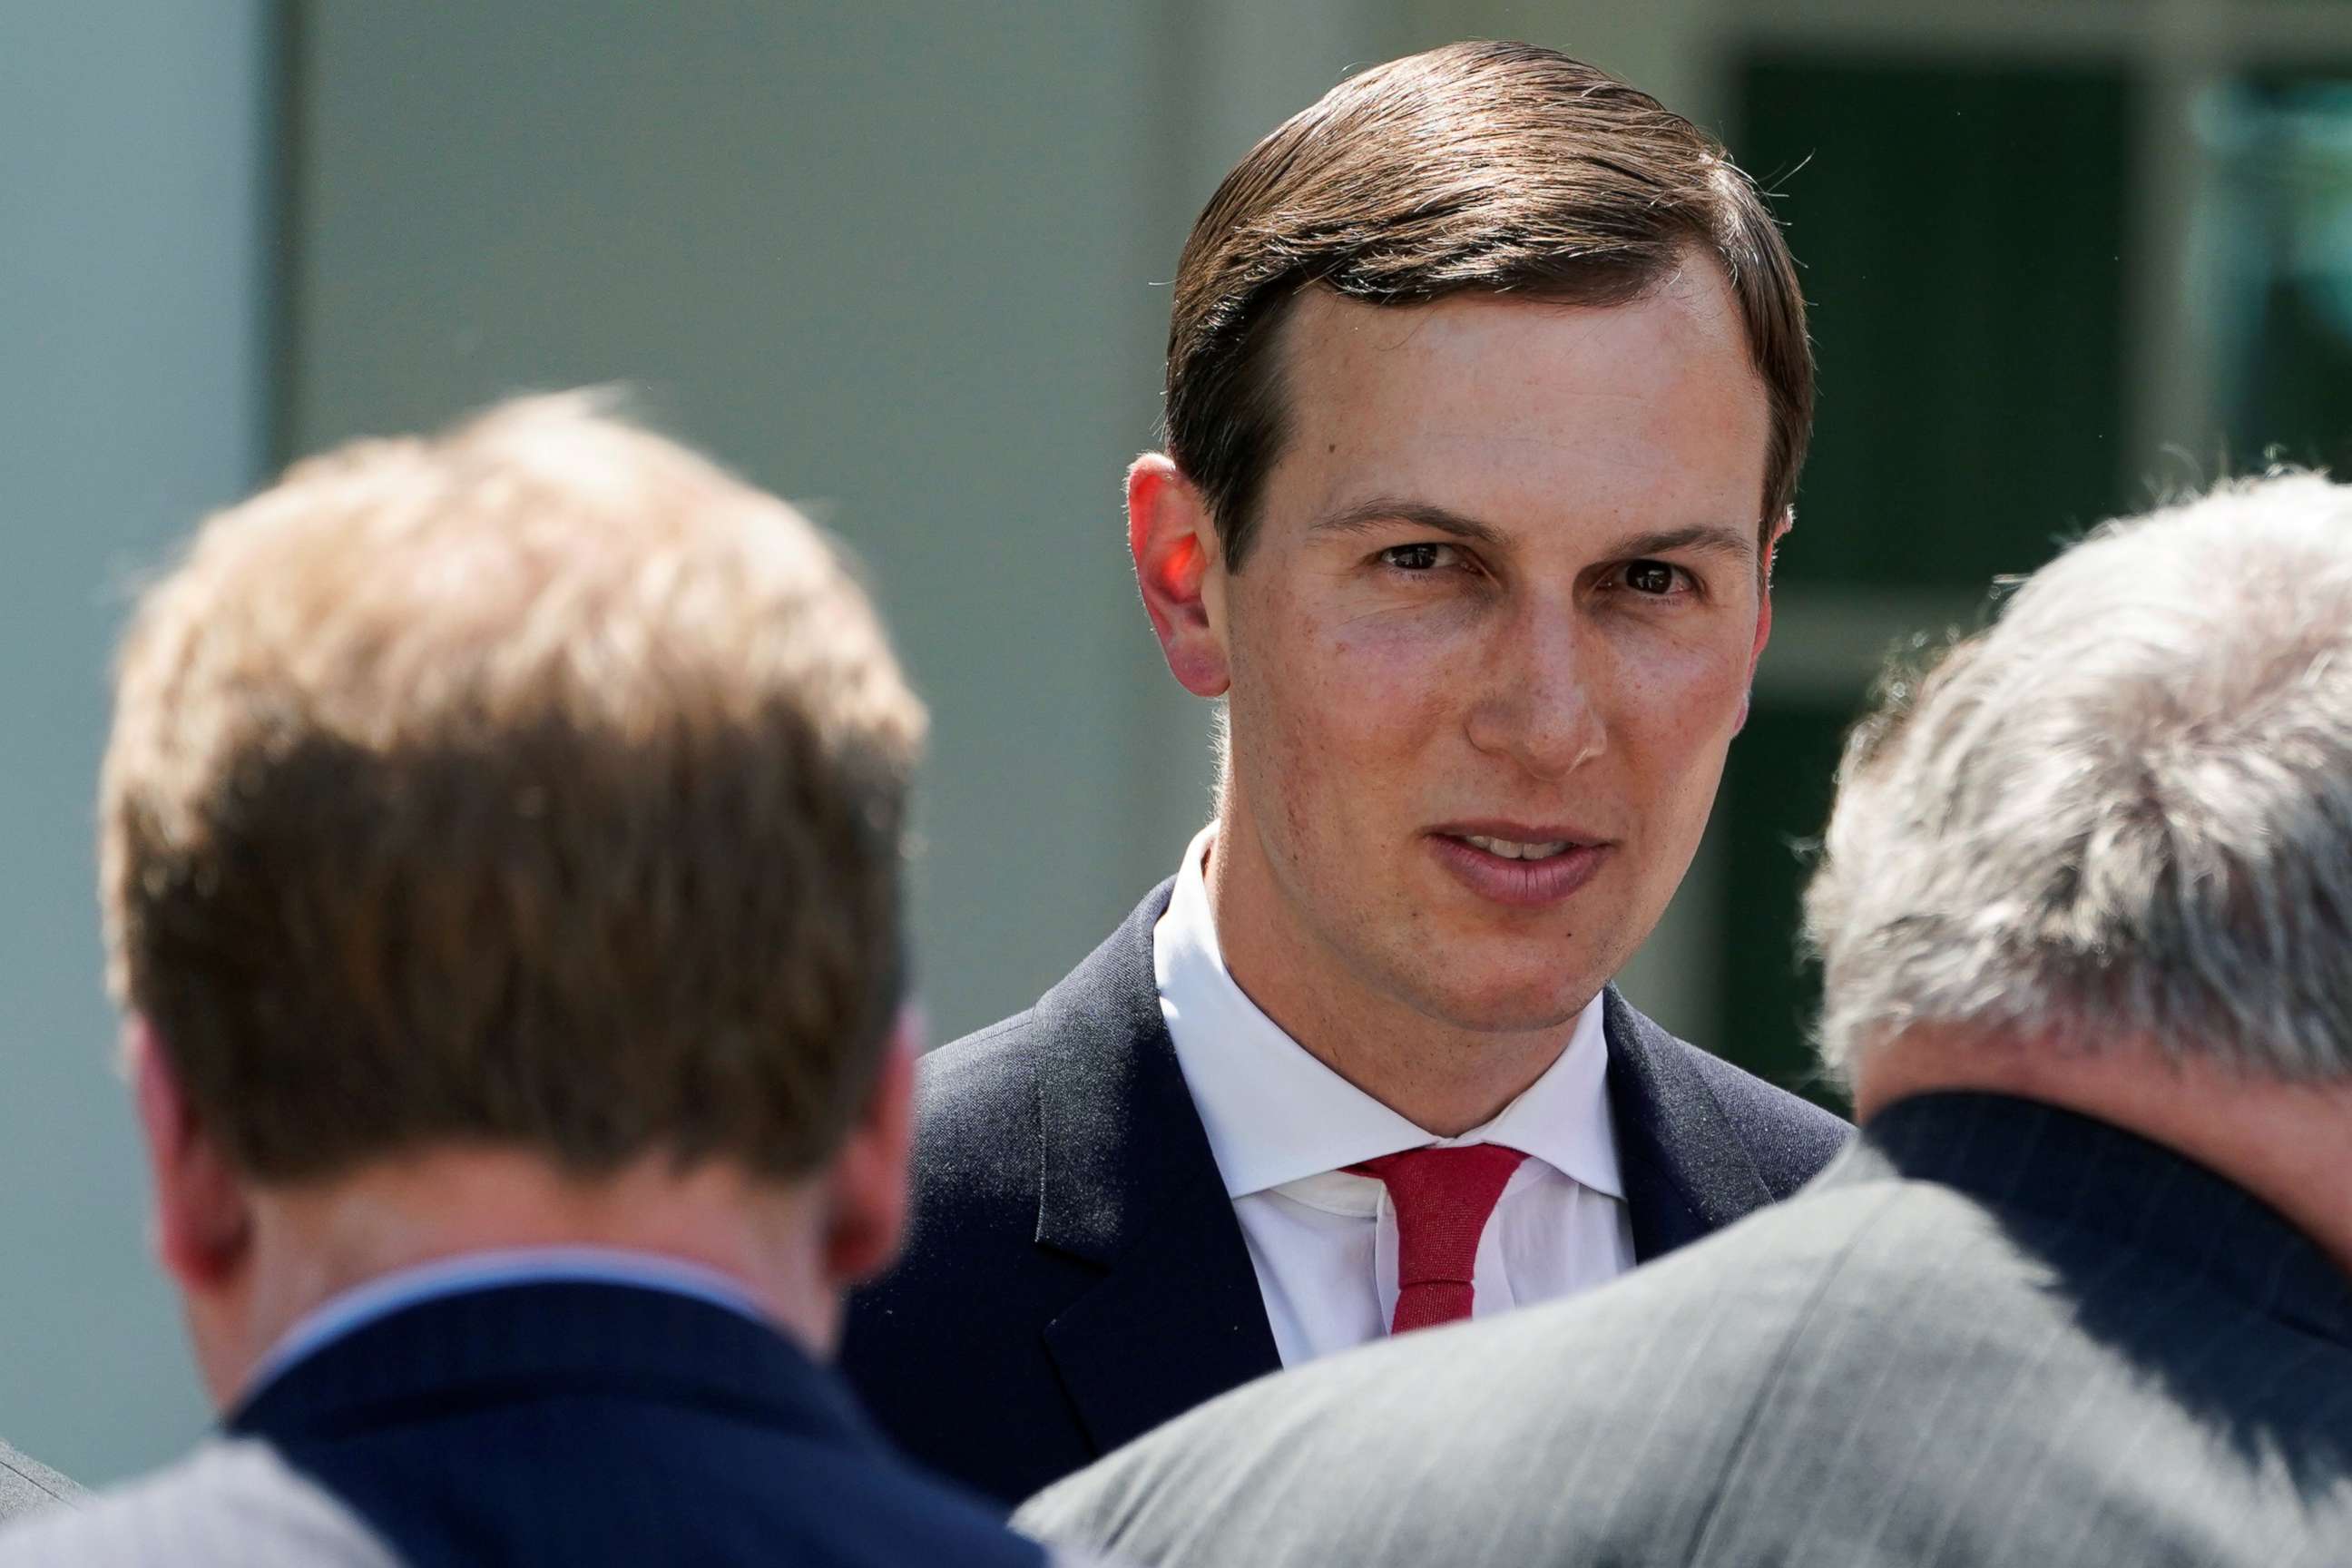 PHOTO: Senior White House Advisor Jared Kushner speaks with guests after U.S. President Donald Trump delivered remarks on immigration reform in the Rose Garden of the White House in Washington, May 16, 2019.